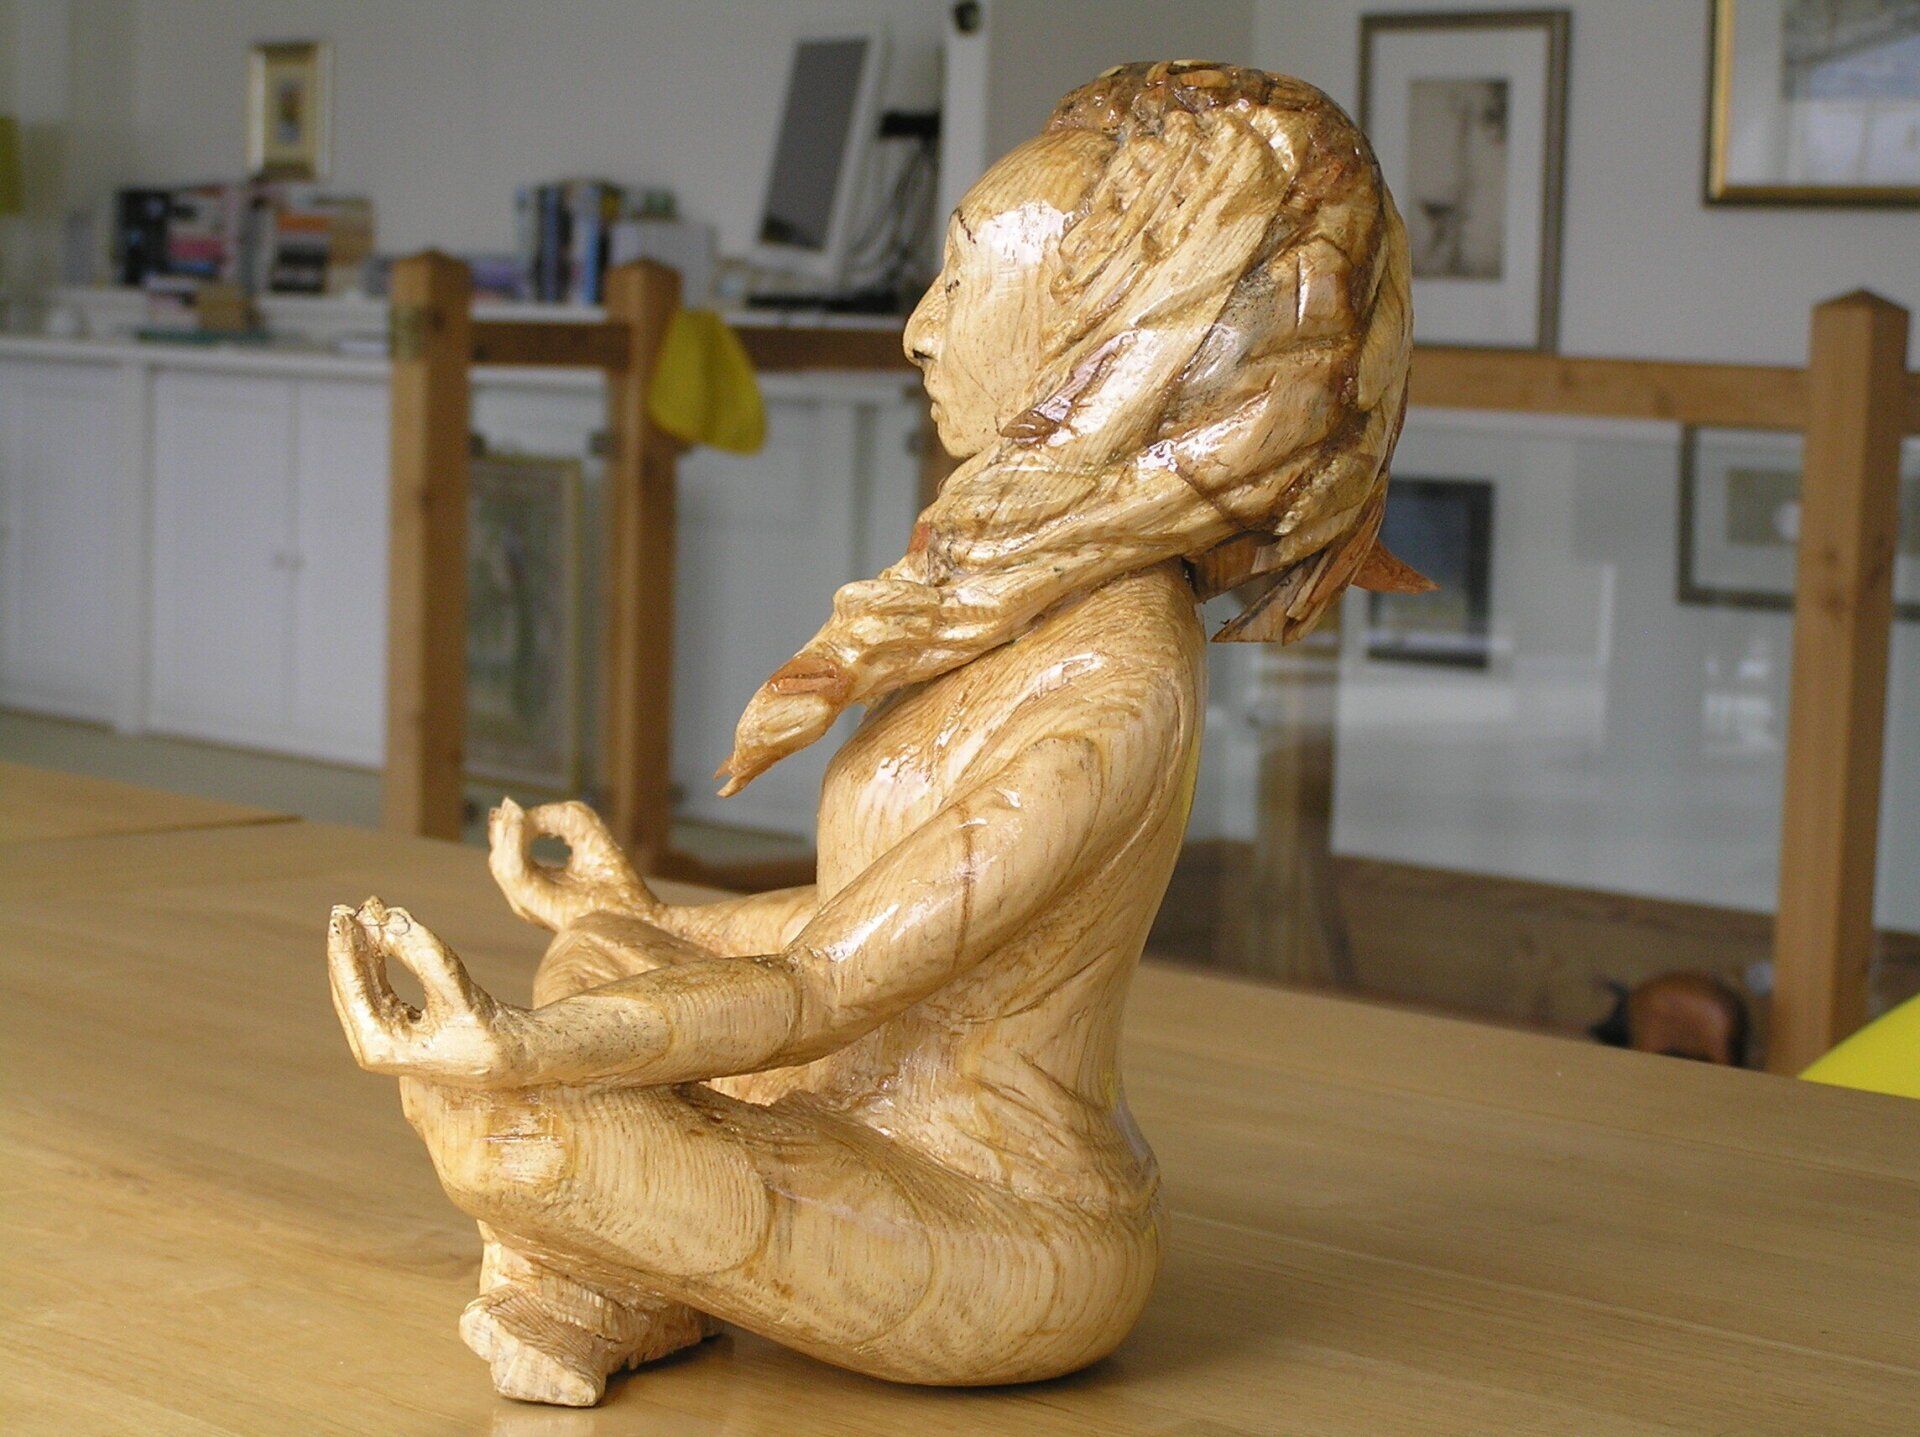 A small wooden figurative sculpture made from wood by Ingrained Culture.